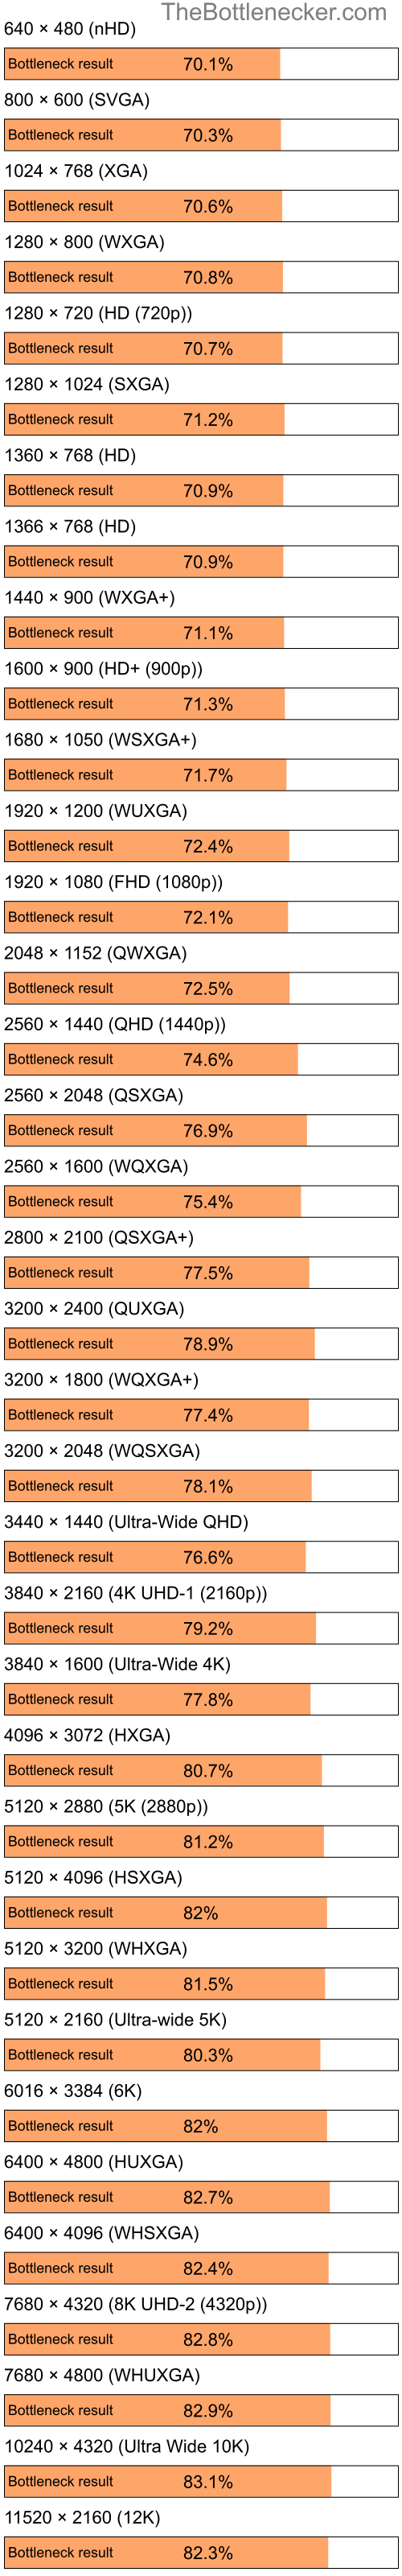 Bottleneck results by resolution for Intel Celeron M 420 and AMD Mobility Radeon HD 2400 XT in Graphic Card Intense Tasks